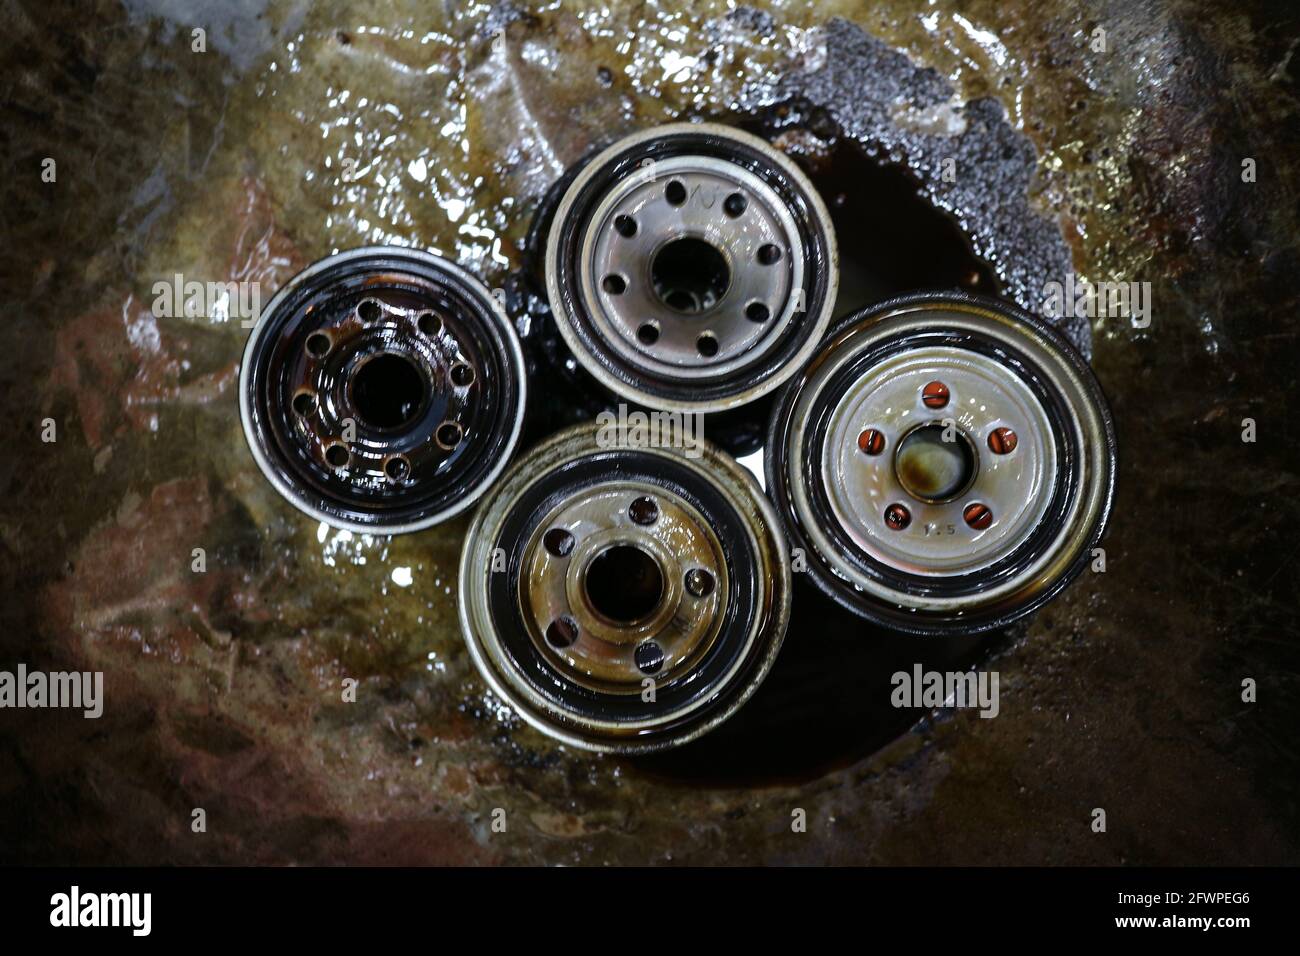 Kuwait City – Kuwait – April 15, 2021: Used car engine oil filters in metal tray Stock Photo